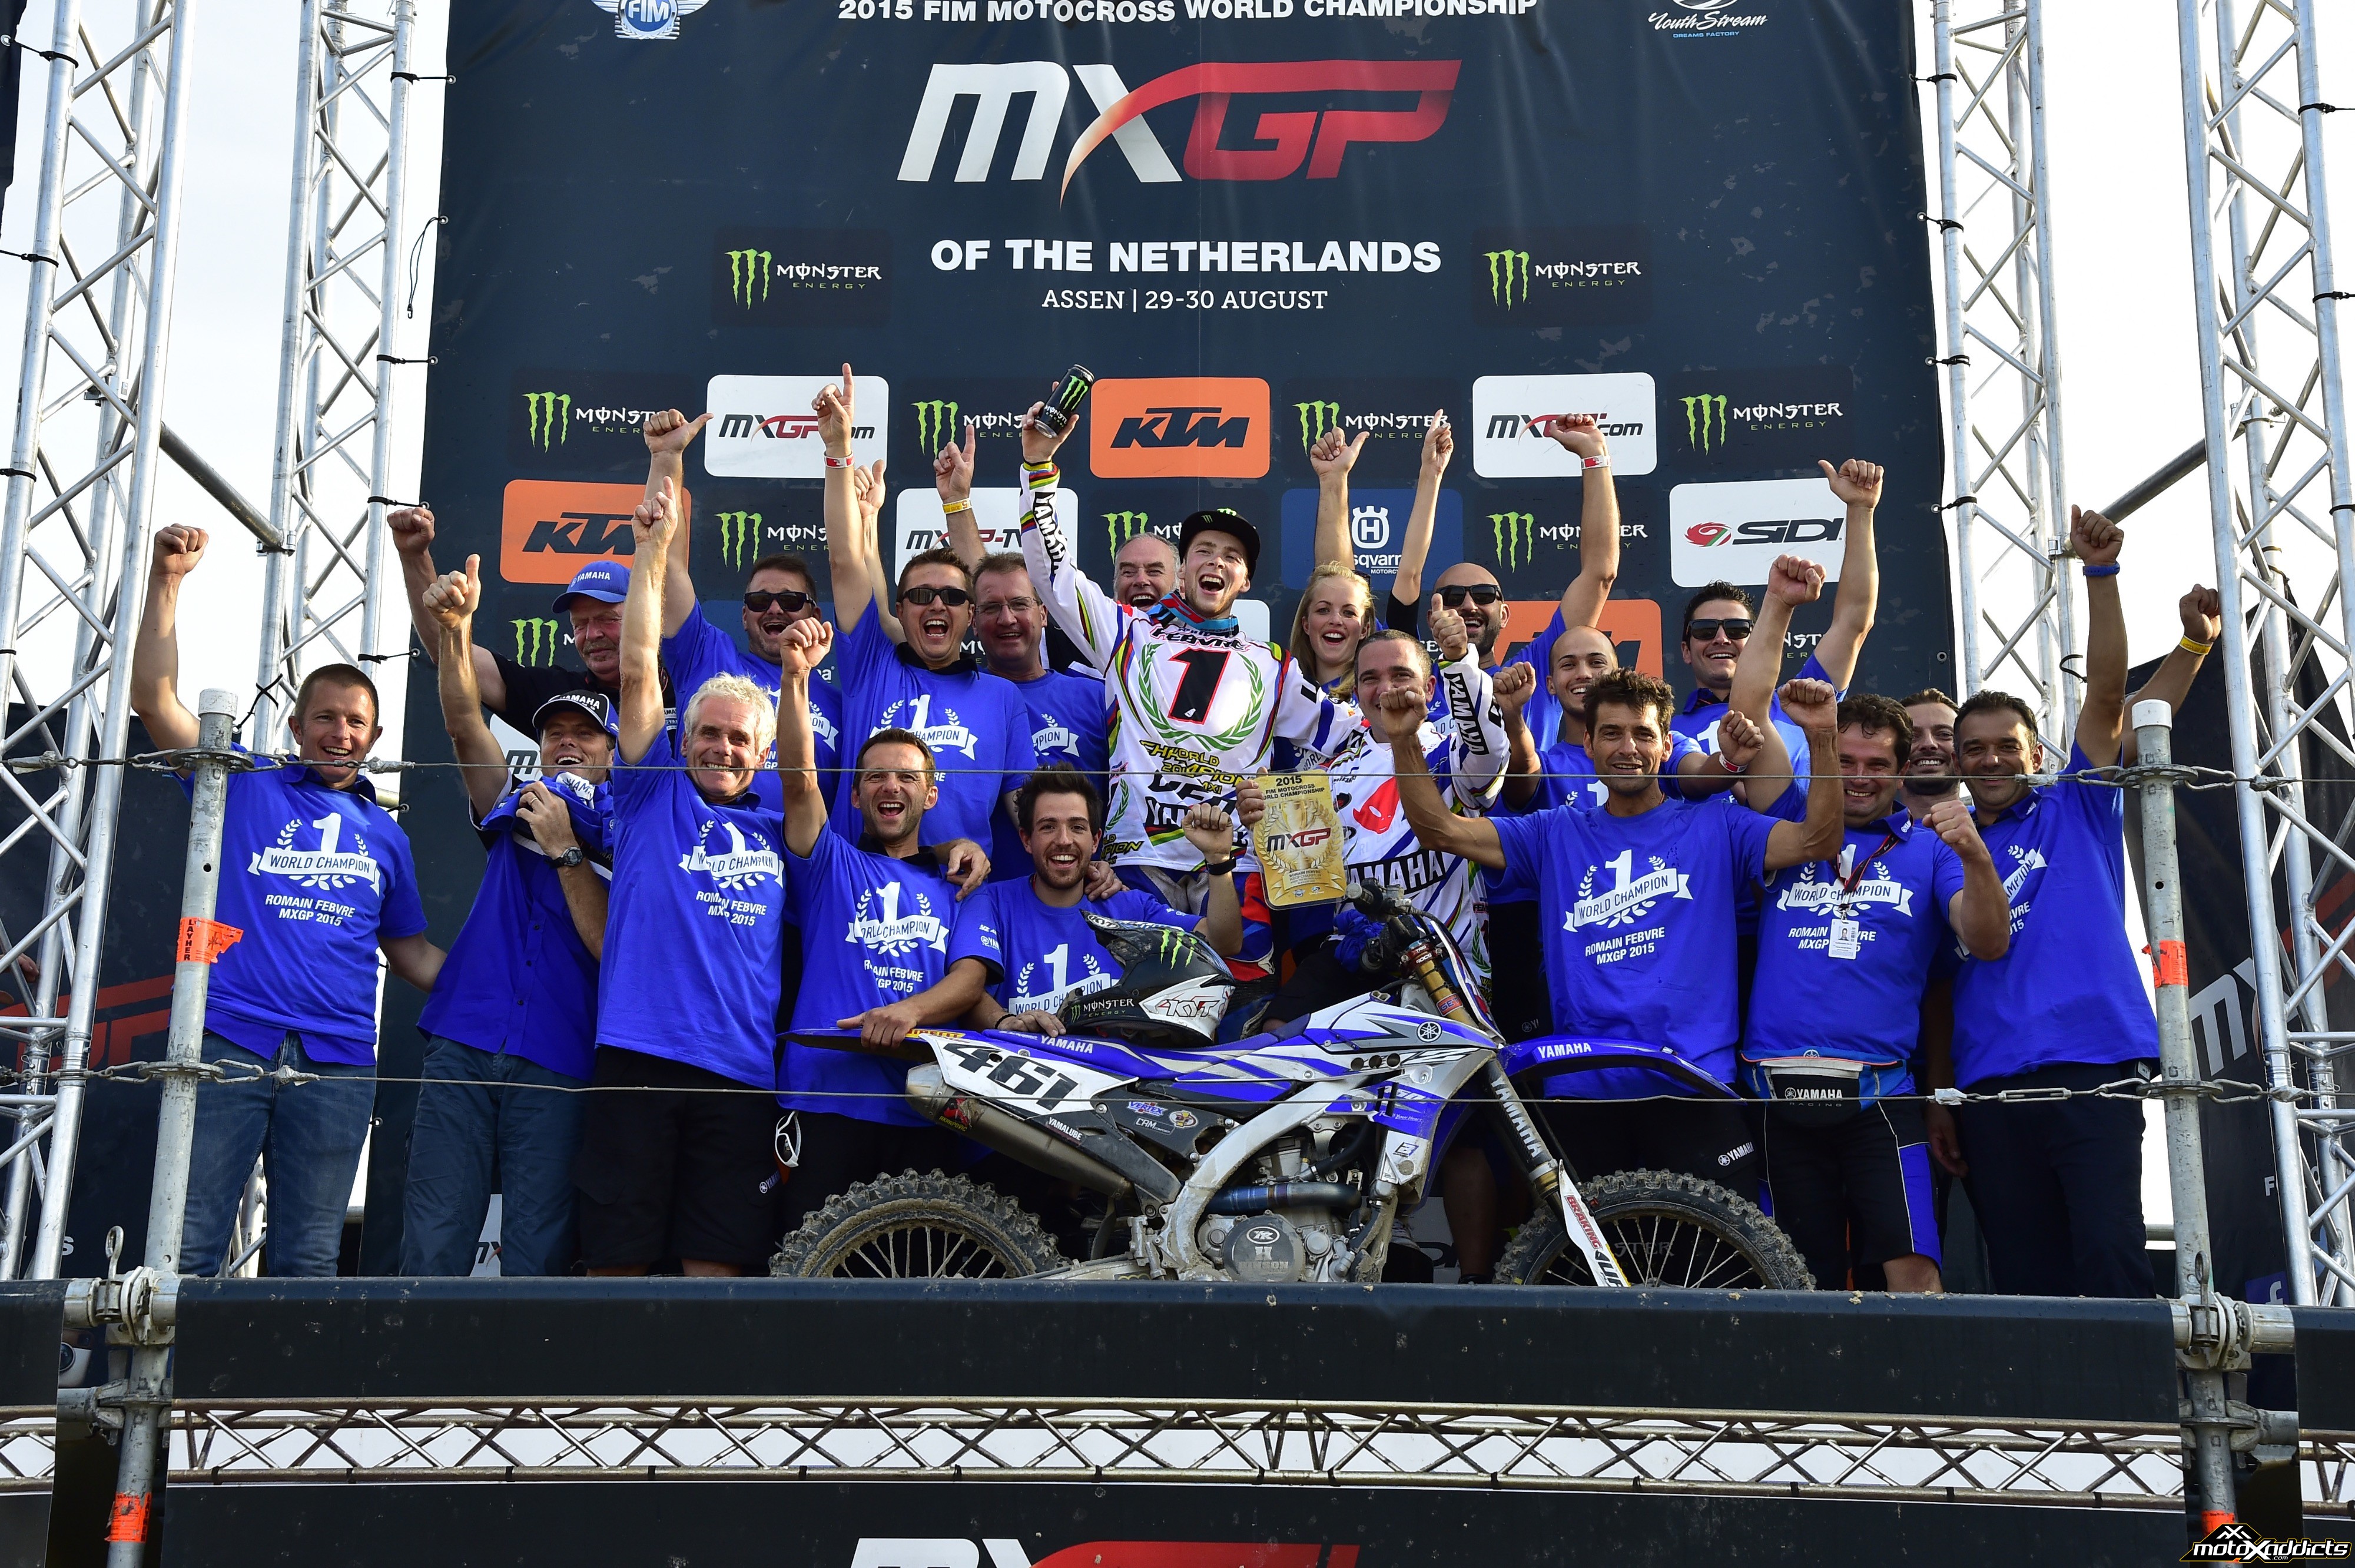 Romain Febvre clinched the 2015 MXGP Championship with four motos to go. 